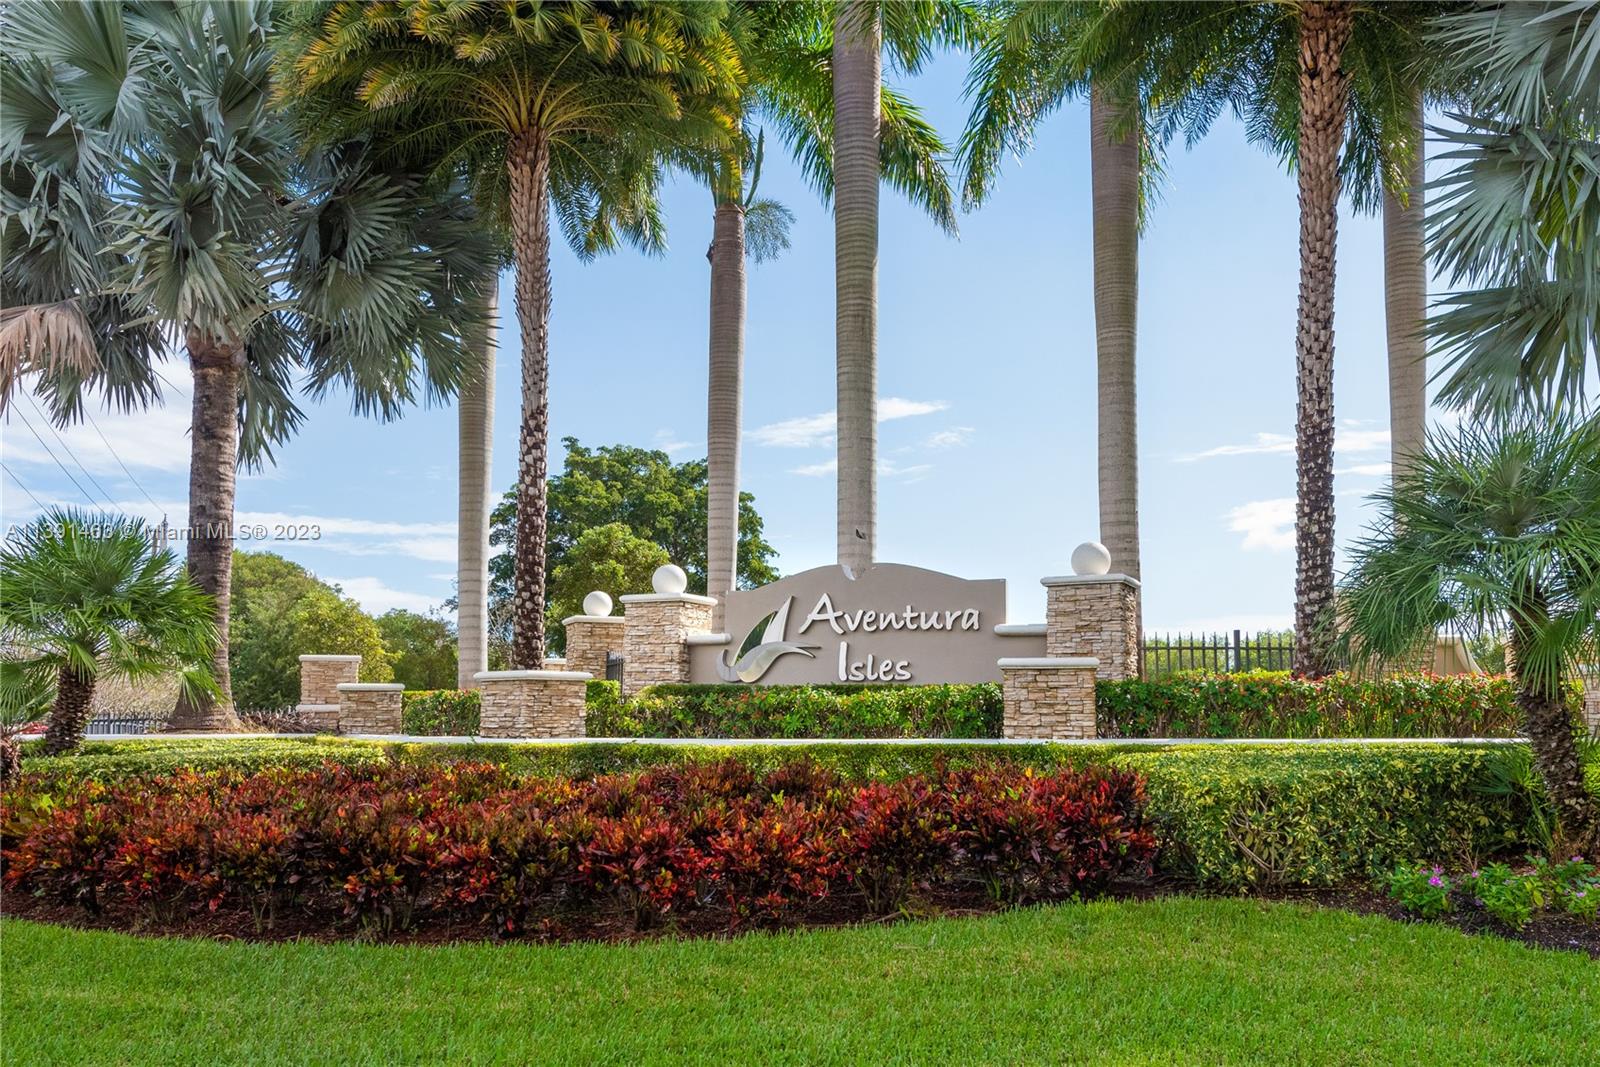 a view of a garden and palm trees